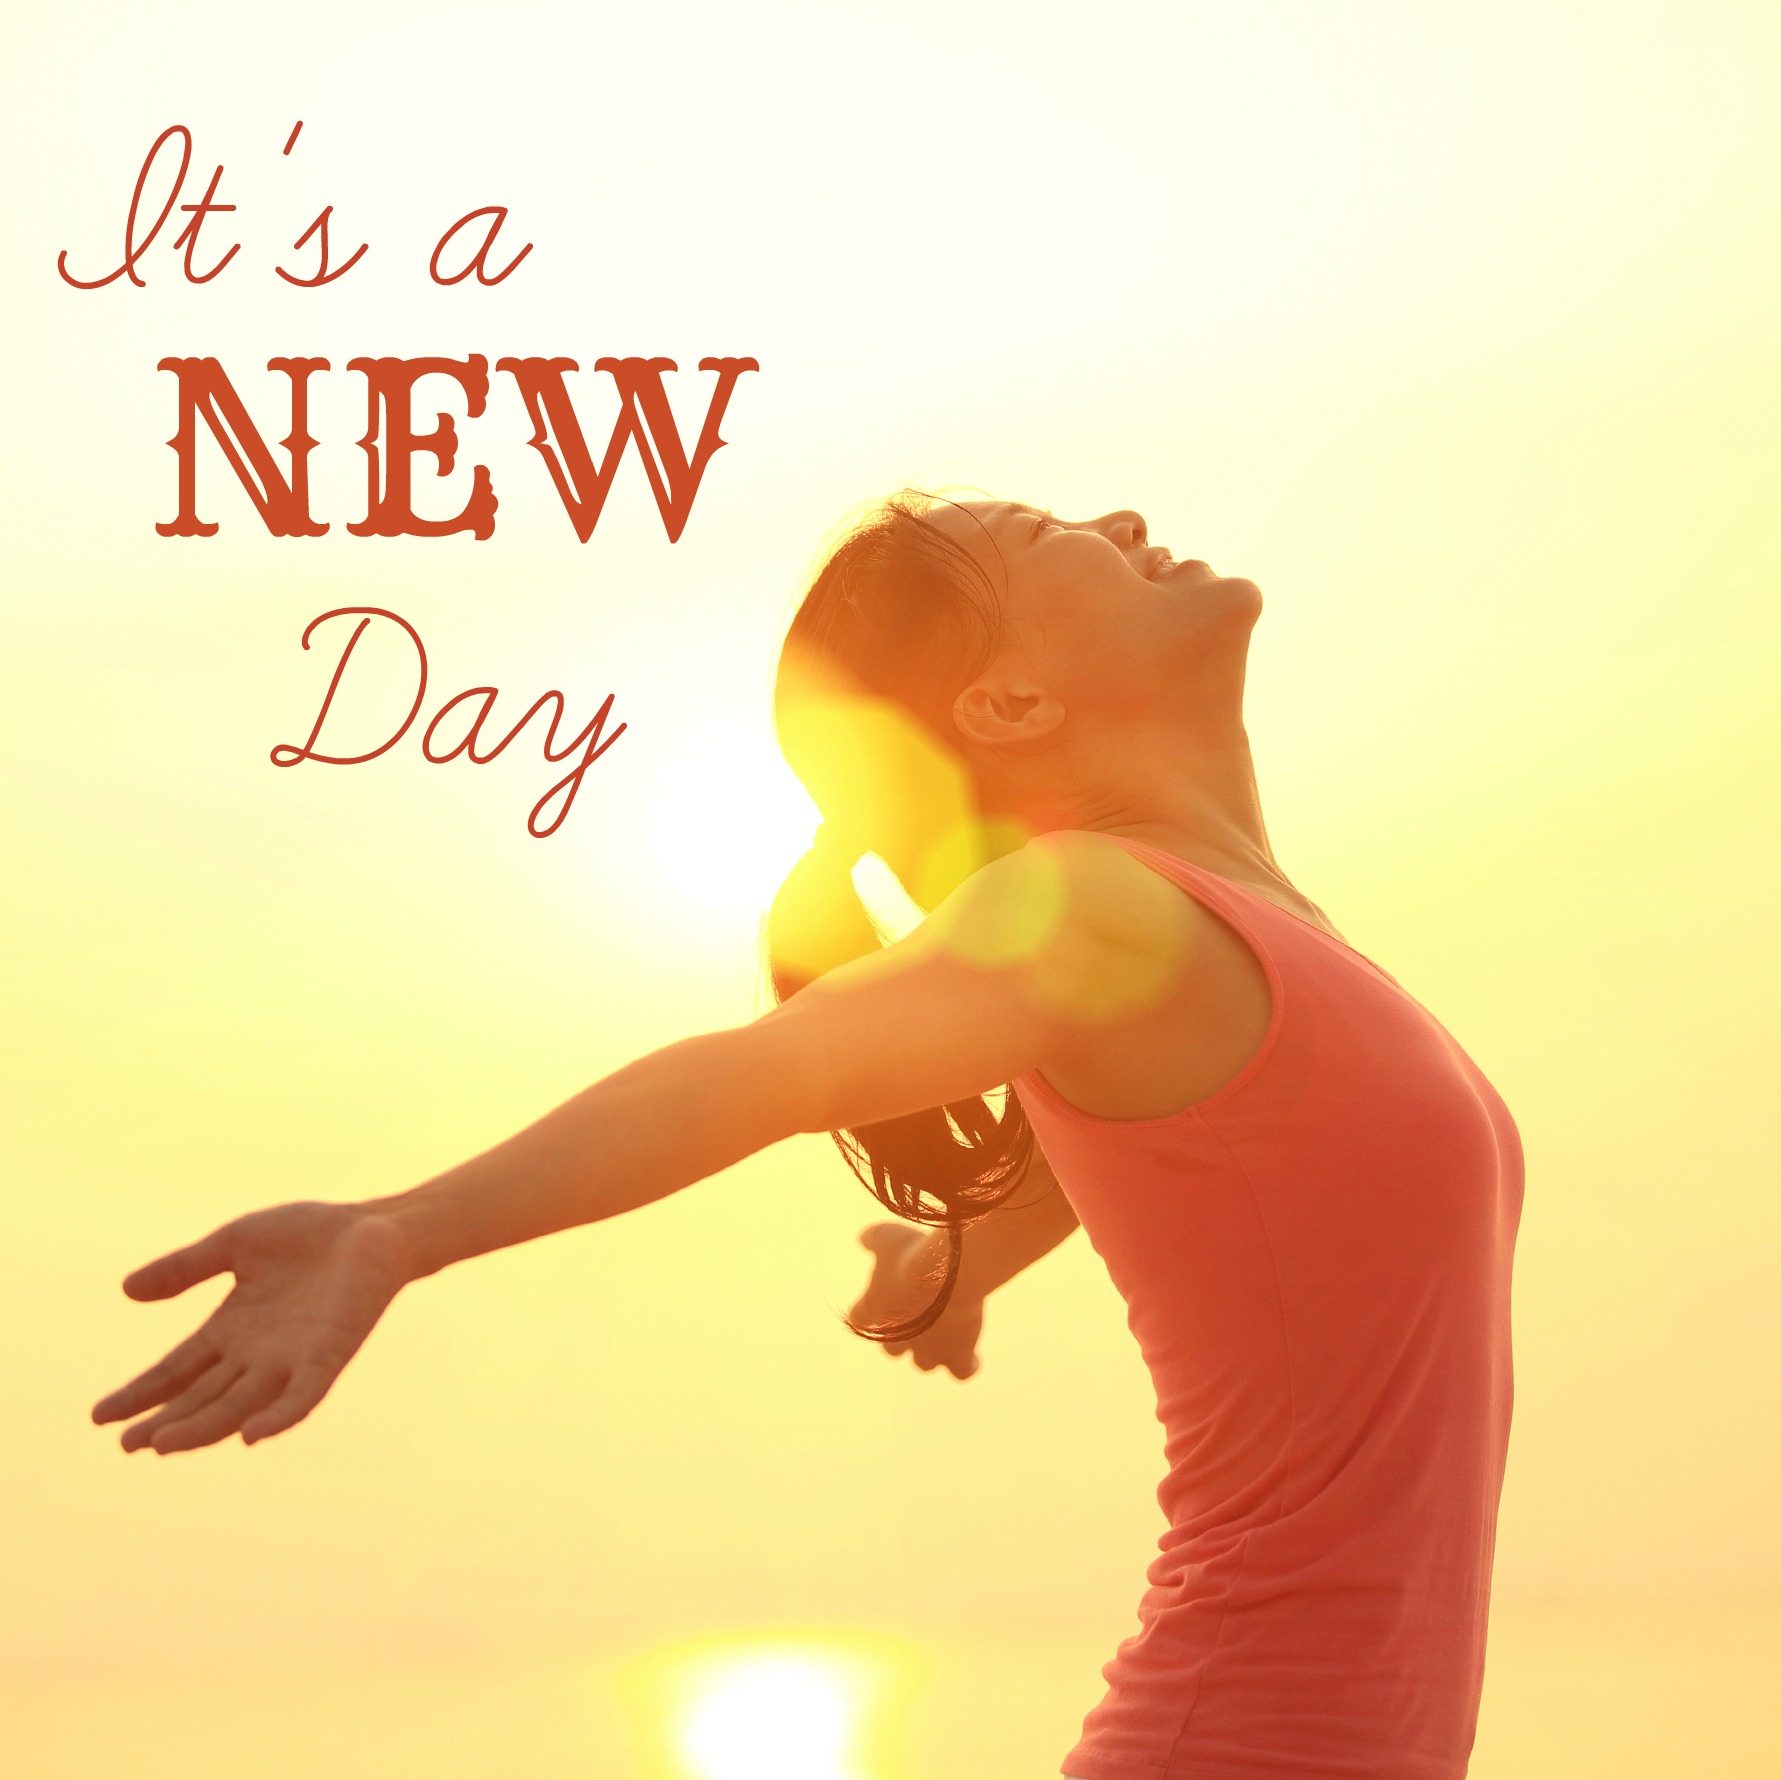 New day films. New week. Happy New Day. It’s a New Day.. Happy New Day картинки.